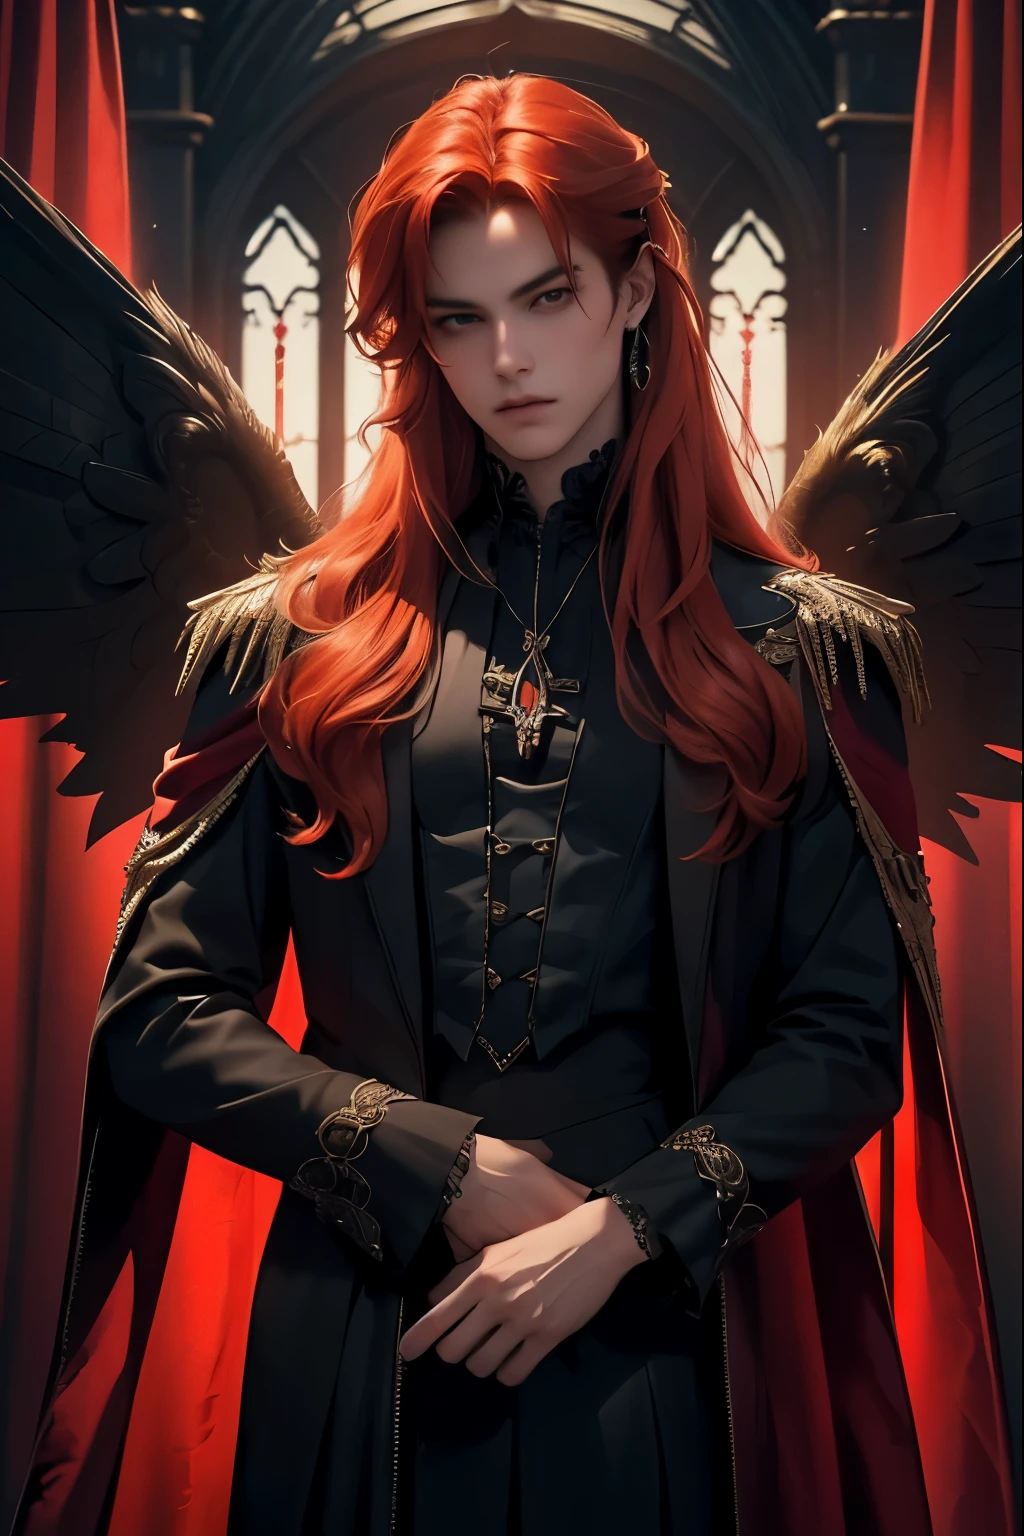 ((Best quality)), ((masterpiece)), 8k (detailed), ((perfect face)), ((halfbody)) perfect proporcions, he is a handsome angel, he is 18 years old, he has long orange hair, he has angel wings, he is not wearing clothes, sexy pose, he is in a room with red curtains, ((perfect face)) ((gothic ambience)) halfbody